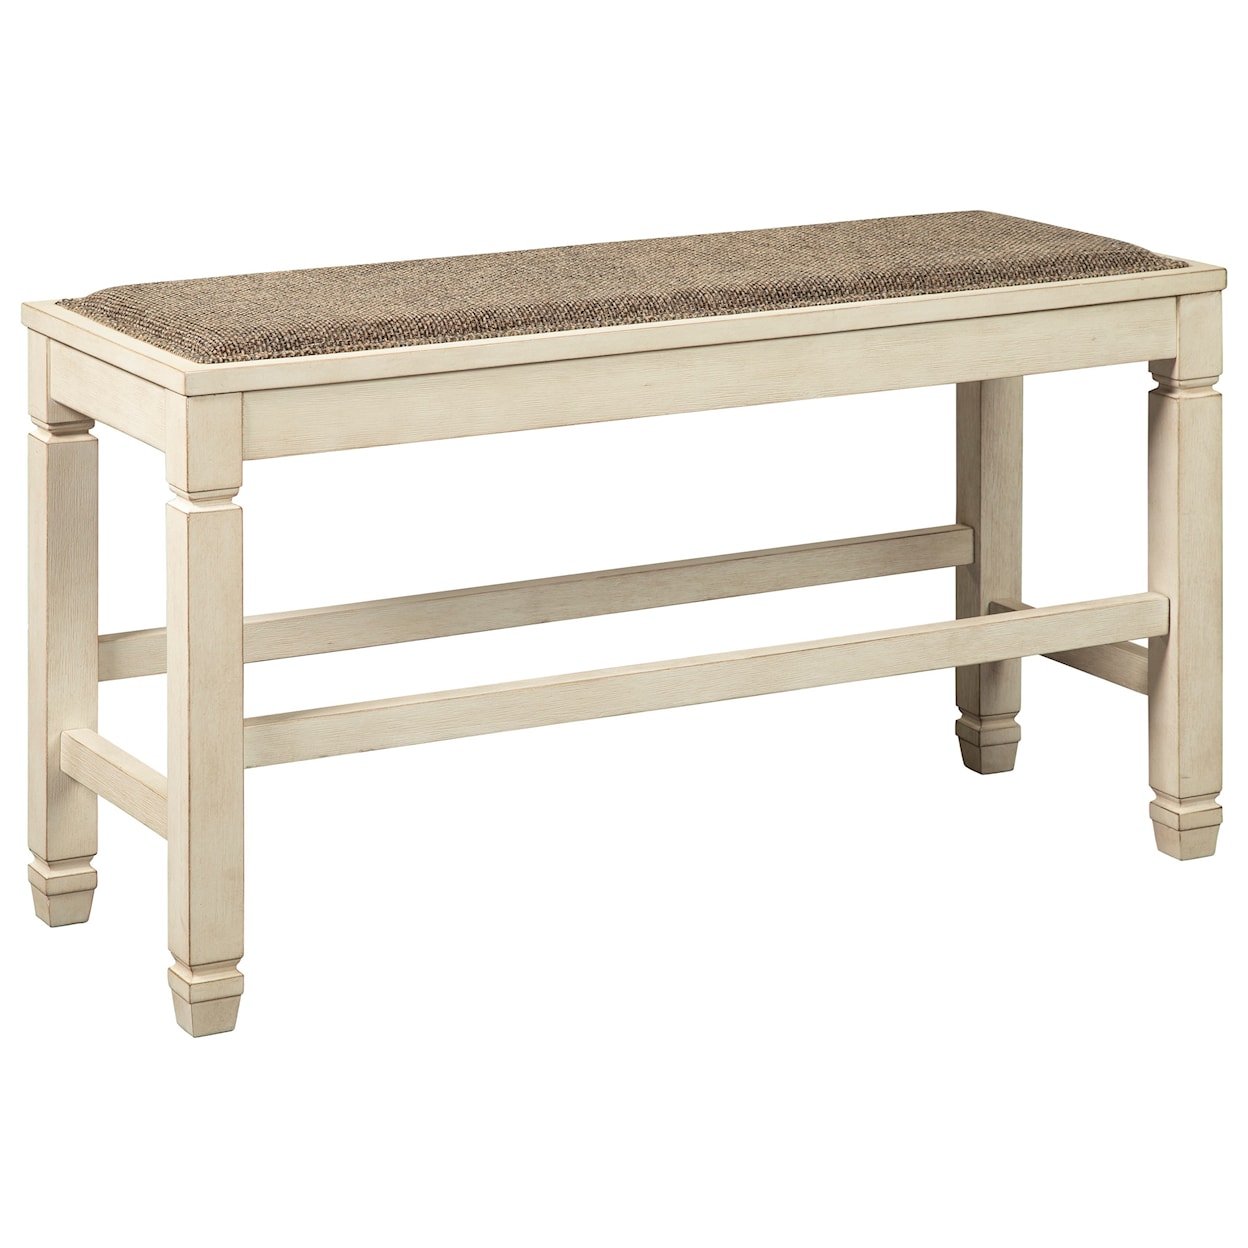 Signature Design Bolanburg Double Counter Upholstered Bench